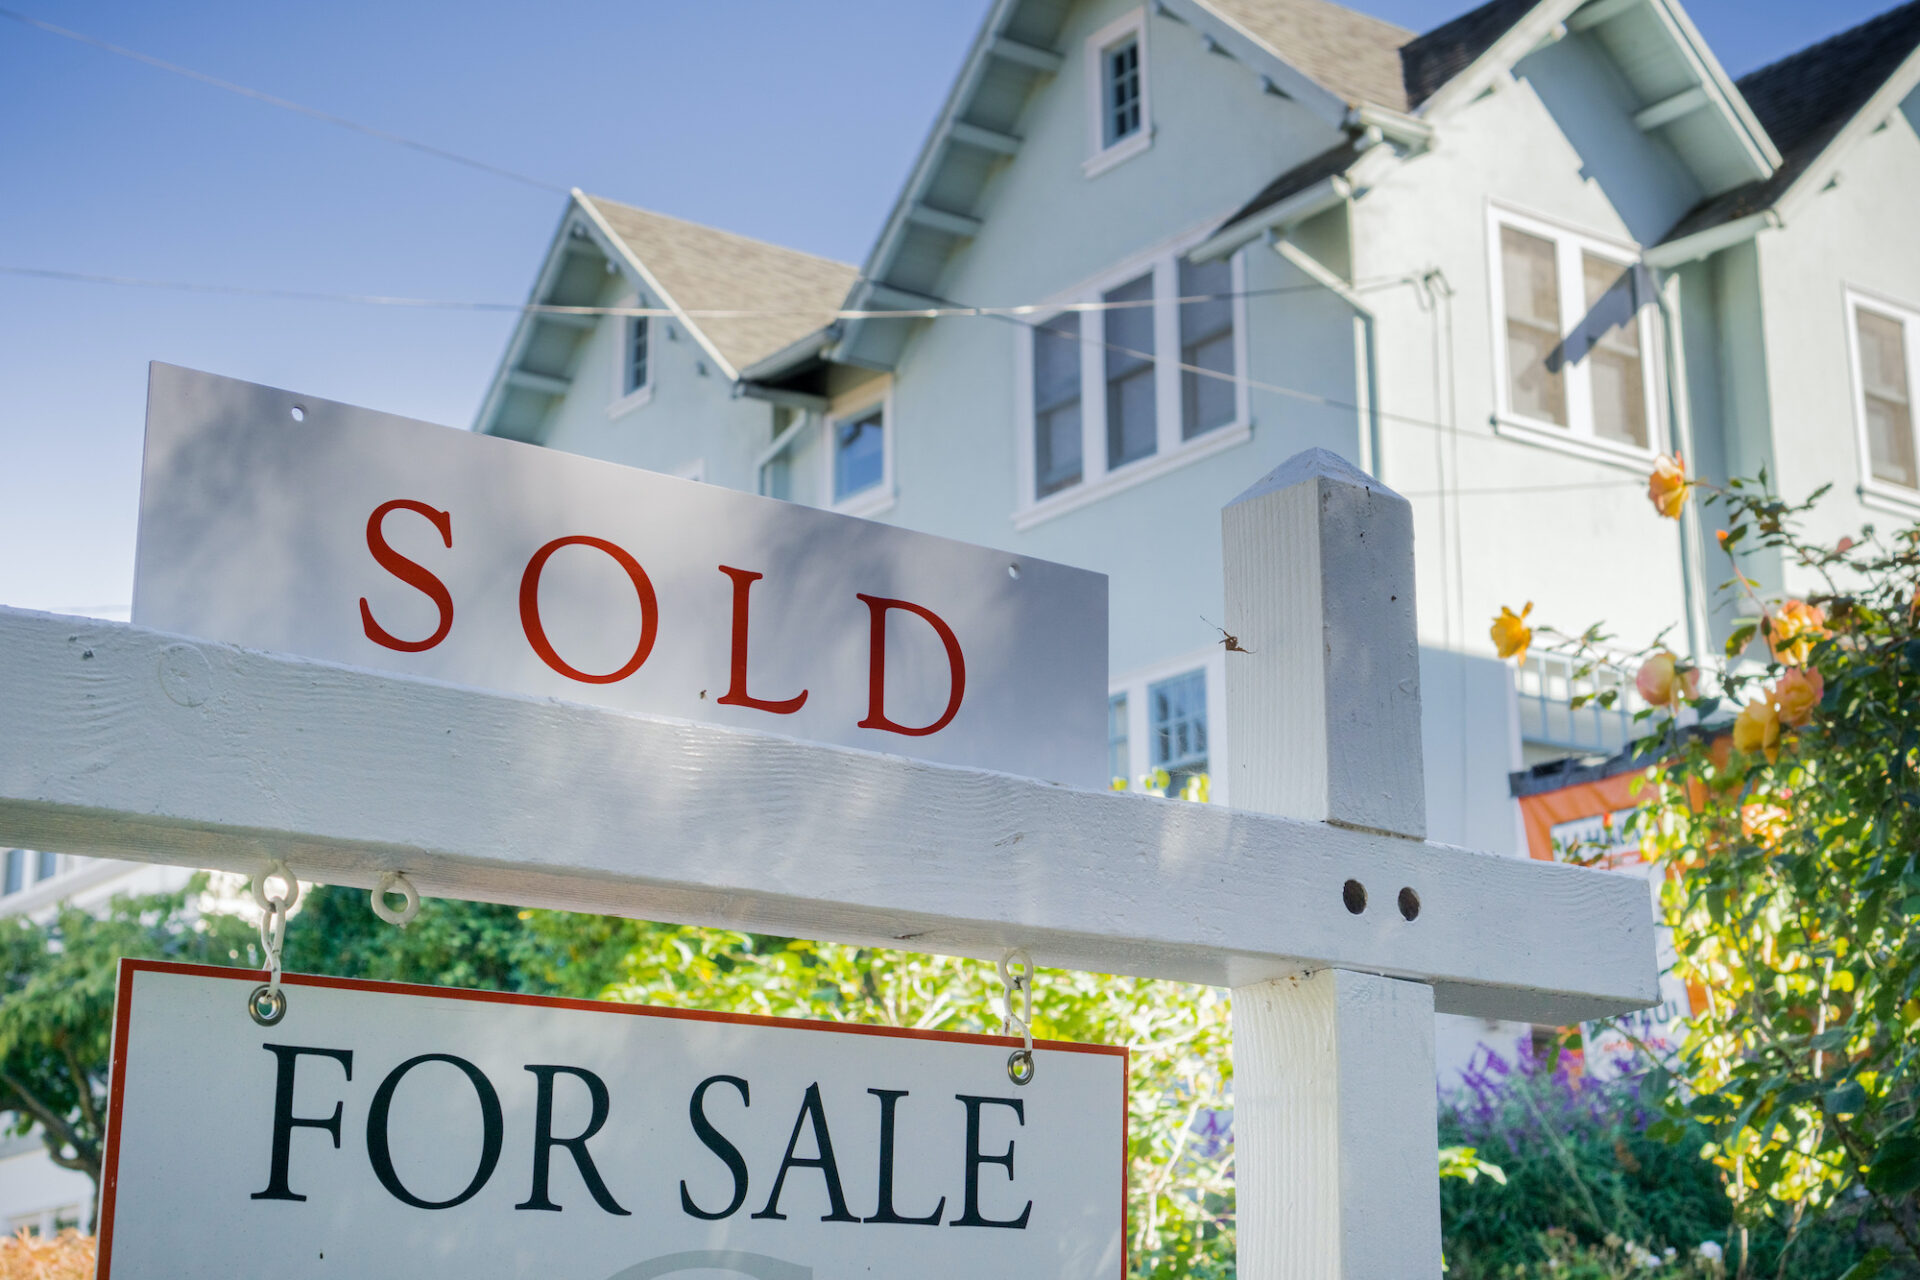 Morning Roundup (6/21/2022) – Existing-Home Sales Slip, Affordability Declines